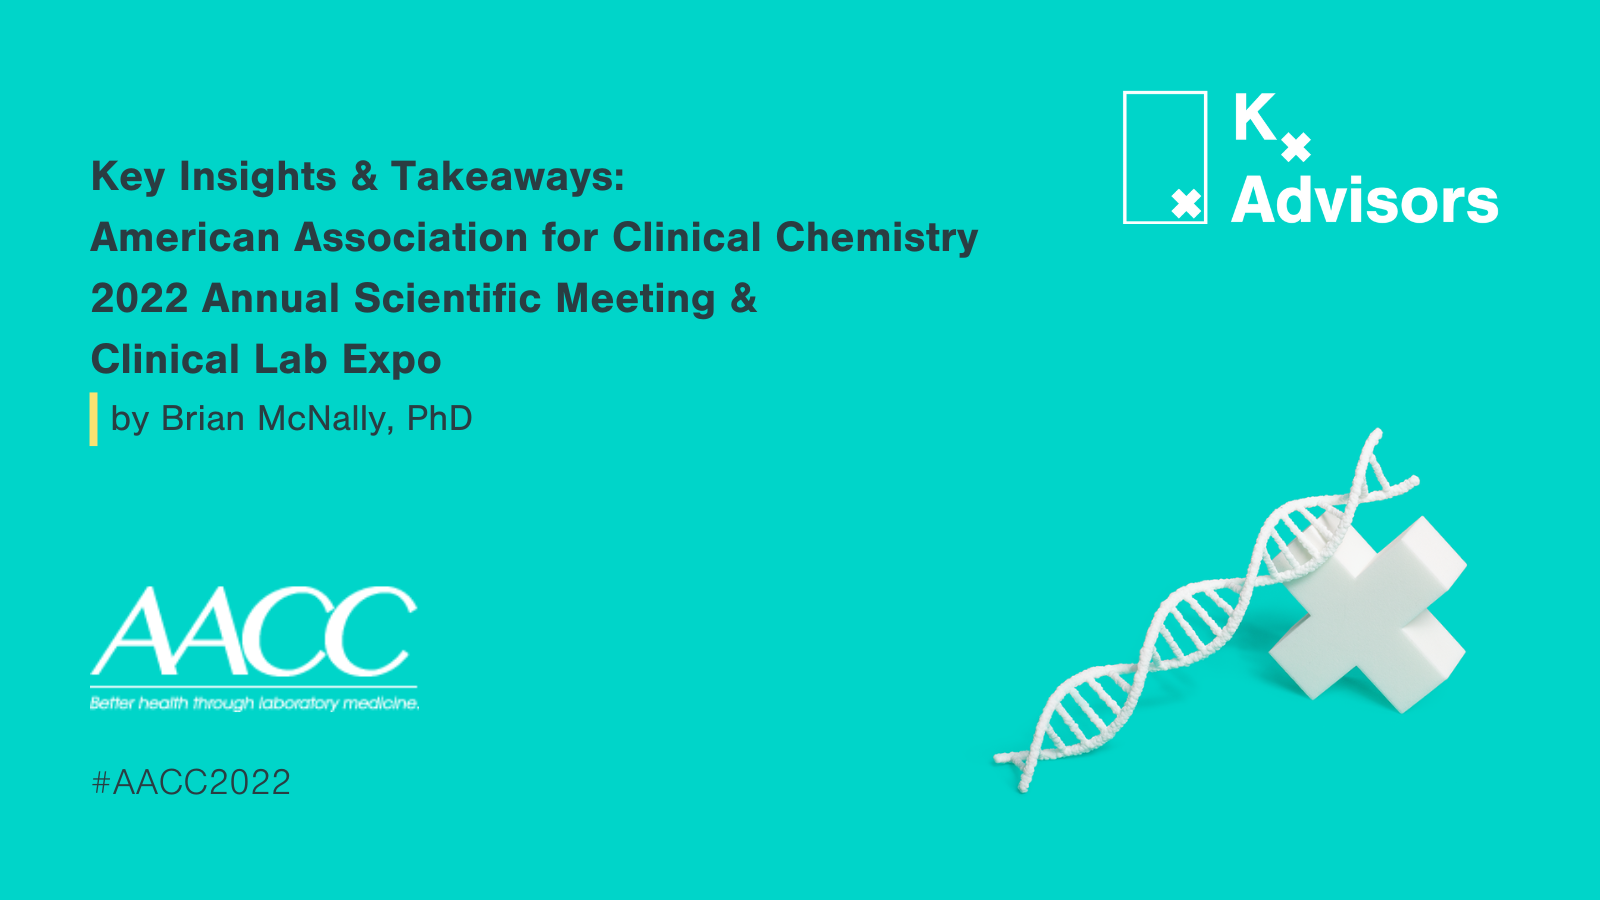 Key Insights & Takeaways: American Association for Clinical Chemistry Annual Scientific Meeting & Clinical Lab Expo